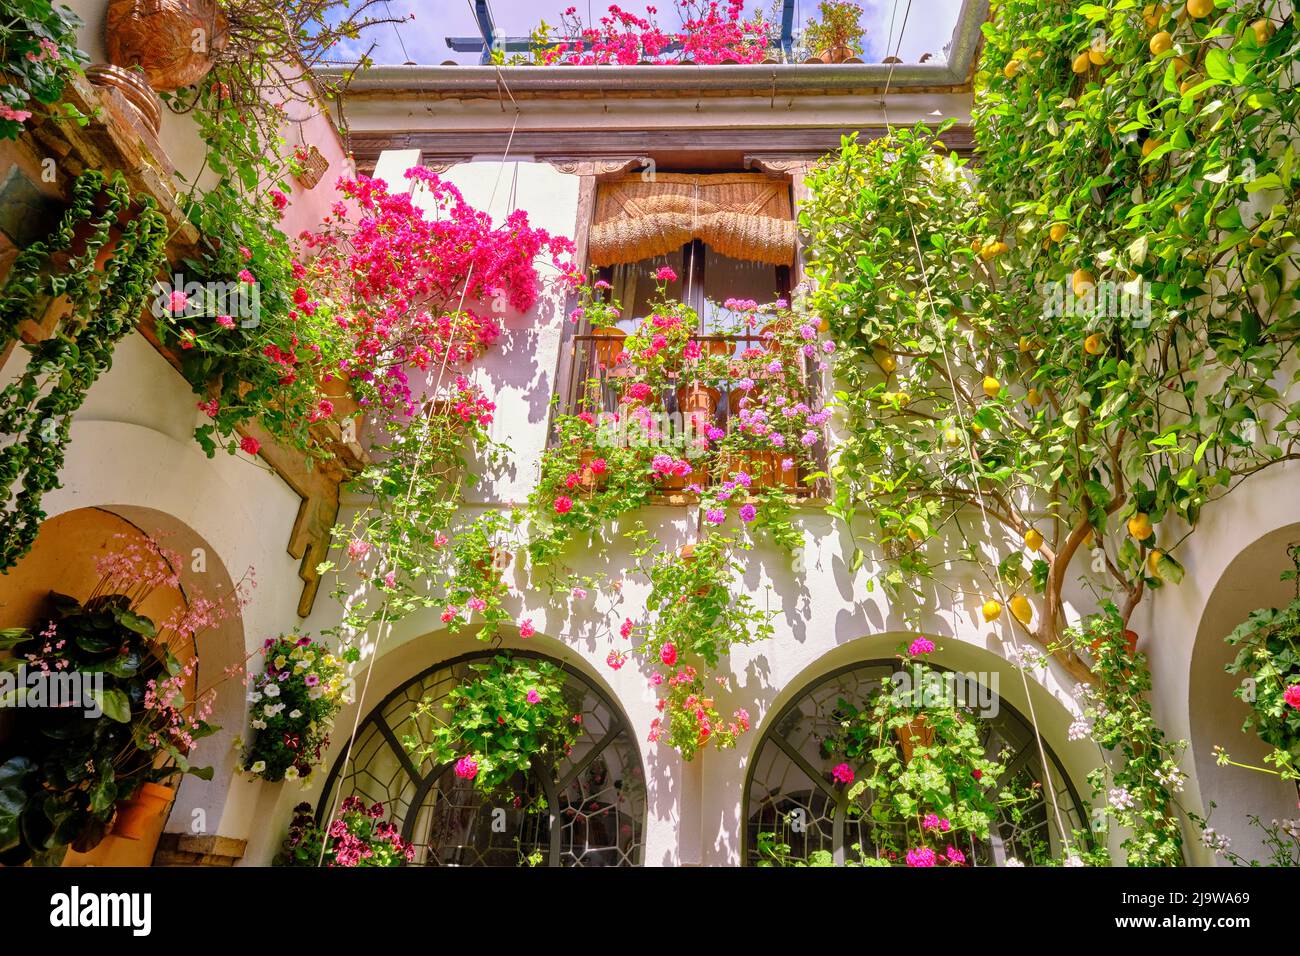 A traditional Patio of Cordoba, a courtyard full of flowers and freshness. A UNESCO Intangible Cultural Heritage of Humanity. Andalucia, Spain Stock Photo